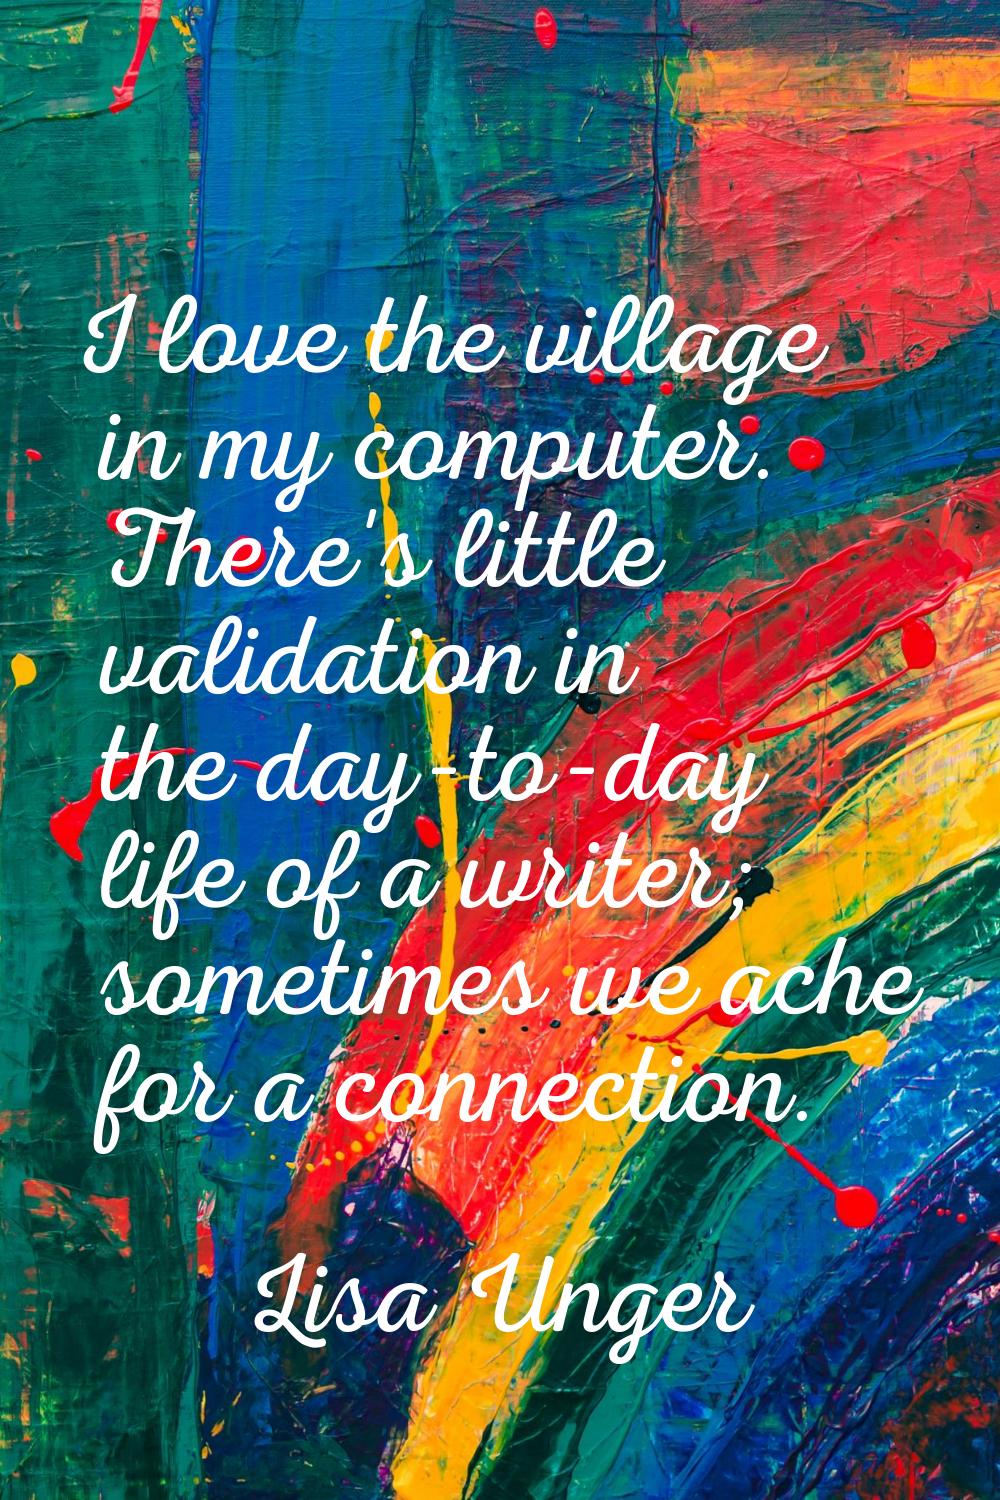 I love the village in my computer. There's little validation in the day-to-day life of a writer; so